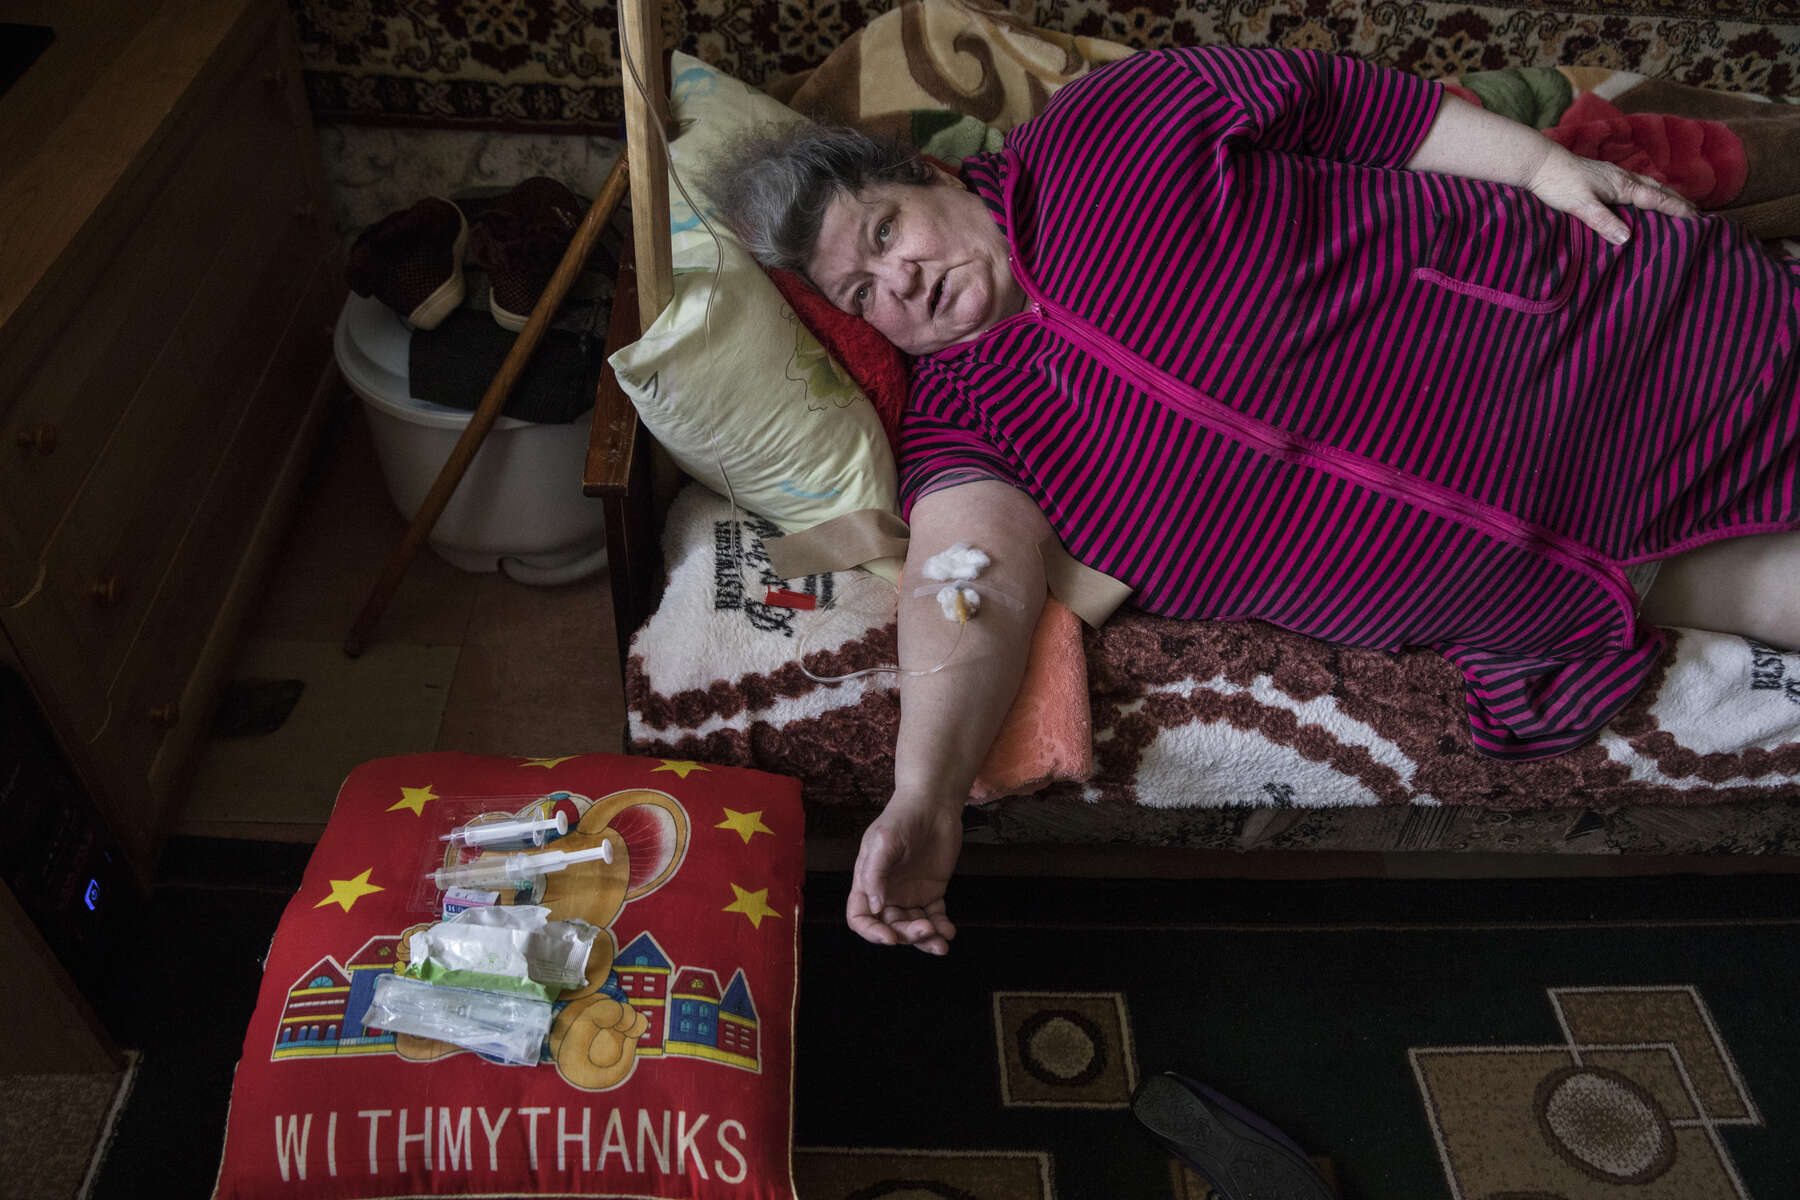 Zolote, Luhansk region: Marina Zelenina, 64, lives alone. She is suffering from the lung disability and is barely able to walk around her small apartment. Her neighbor does shopping for her. A local nurse, Elena visits a few times per week to provide her with medical assistance scarce in this area situated few kilometers away from fighting. Her elderly mother died from a heart attack after she had undergone severe shock caused by the shelling at the height of the conflict. Marina's family left the city looking for employment and safety. The woman has not seen them since. Now she talks with them over Skype. 